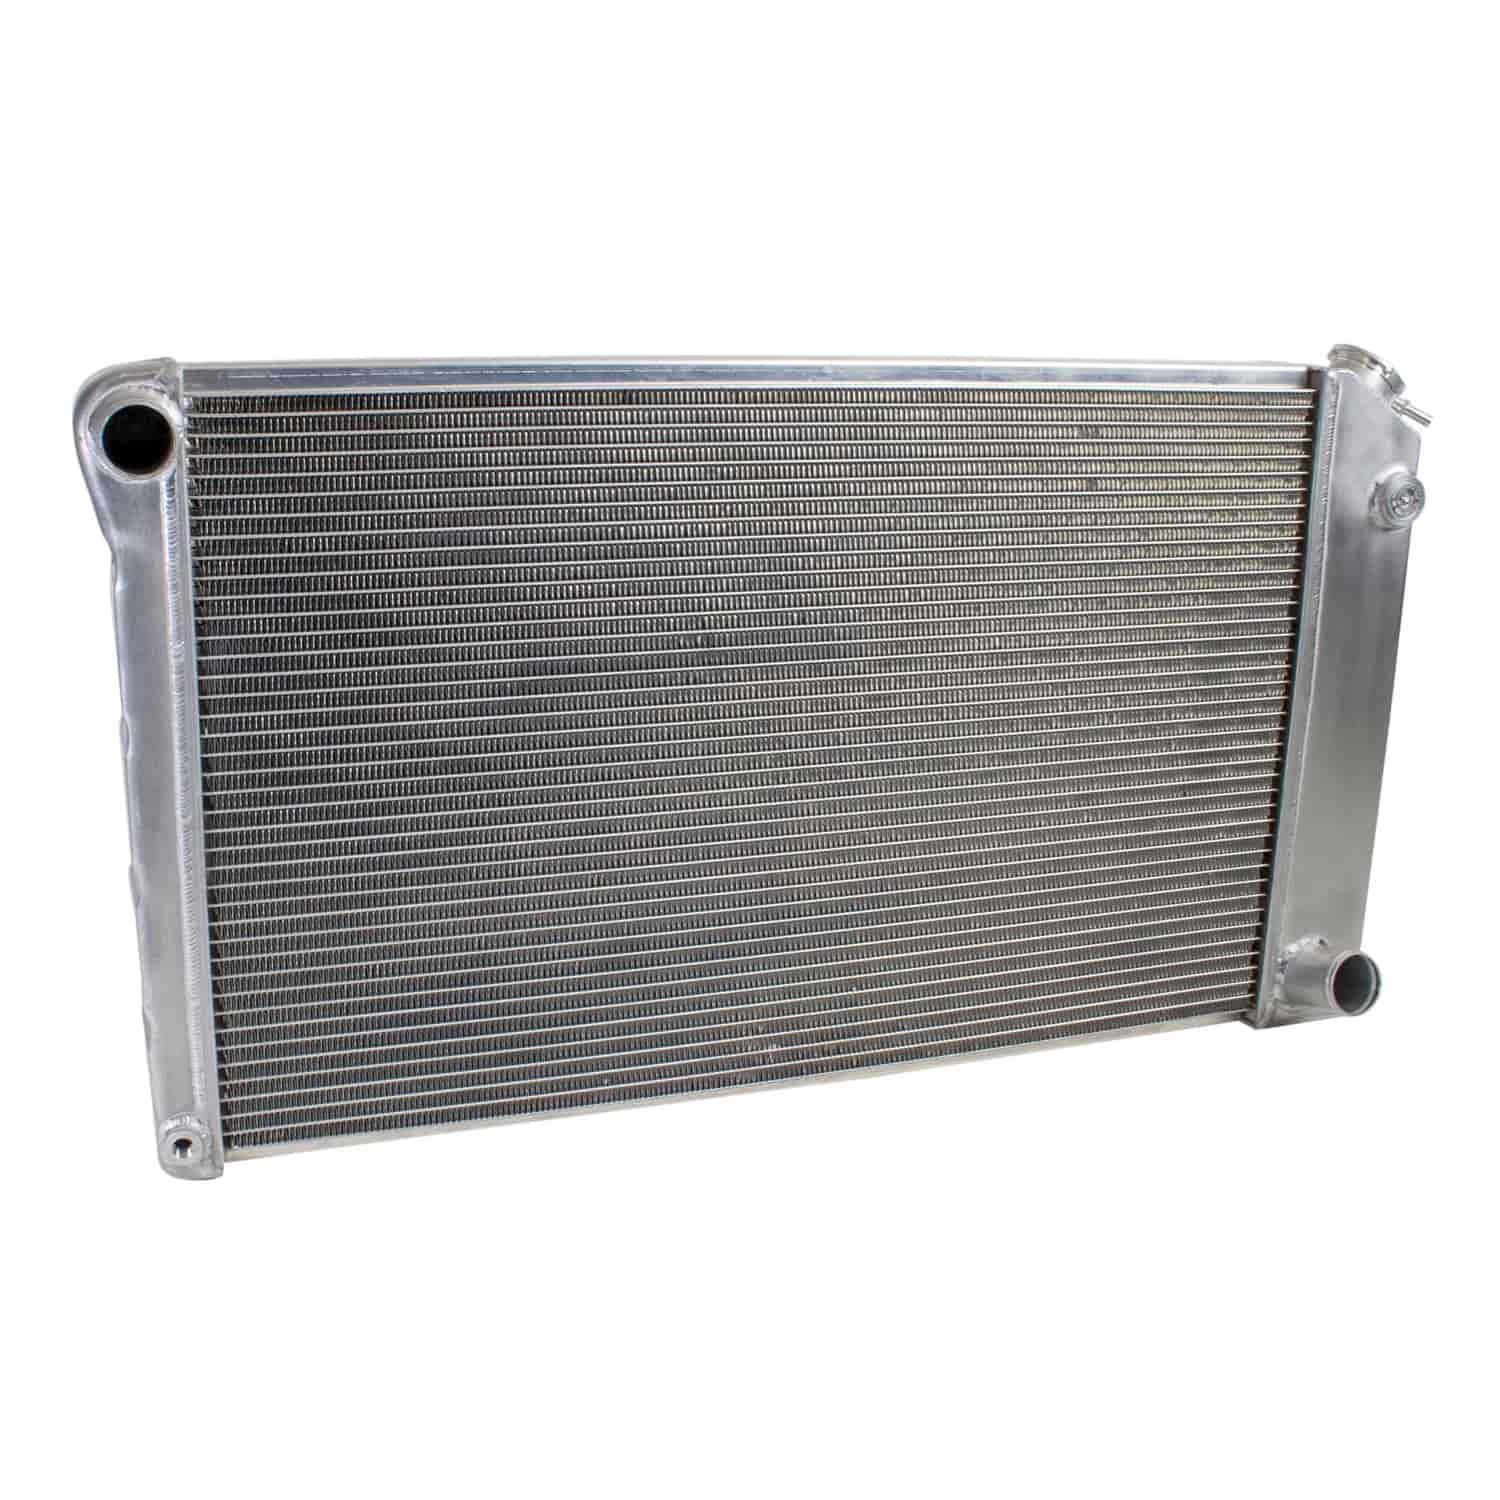 ExactFit Radiator for 1967-1987 Chevy/GMC Pickup Truck, Blazer, Jimmy & Suburban with Small Block Chevy